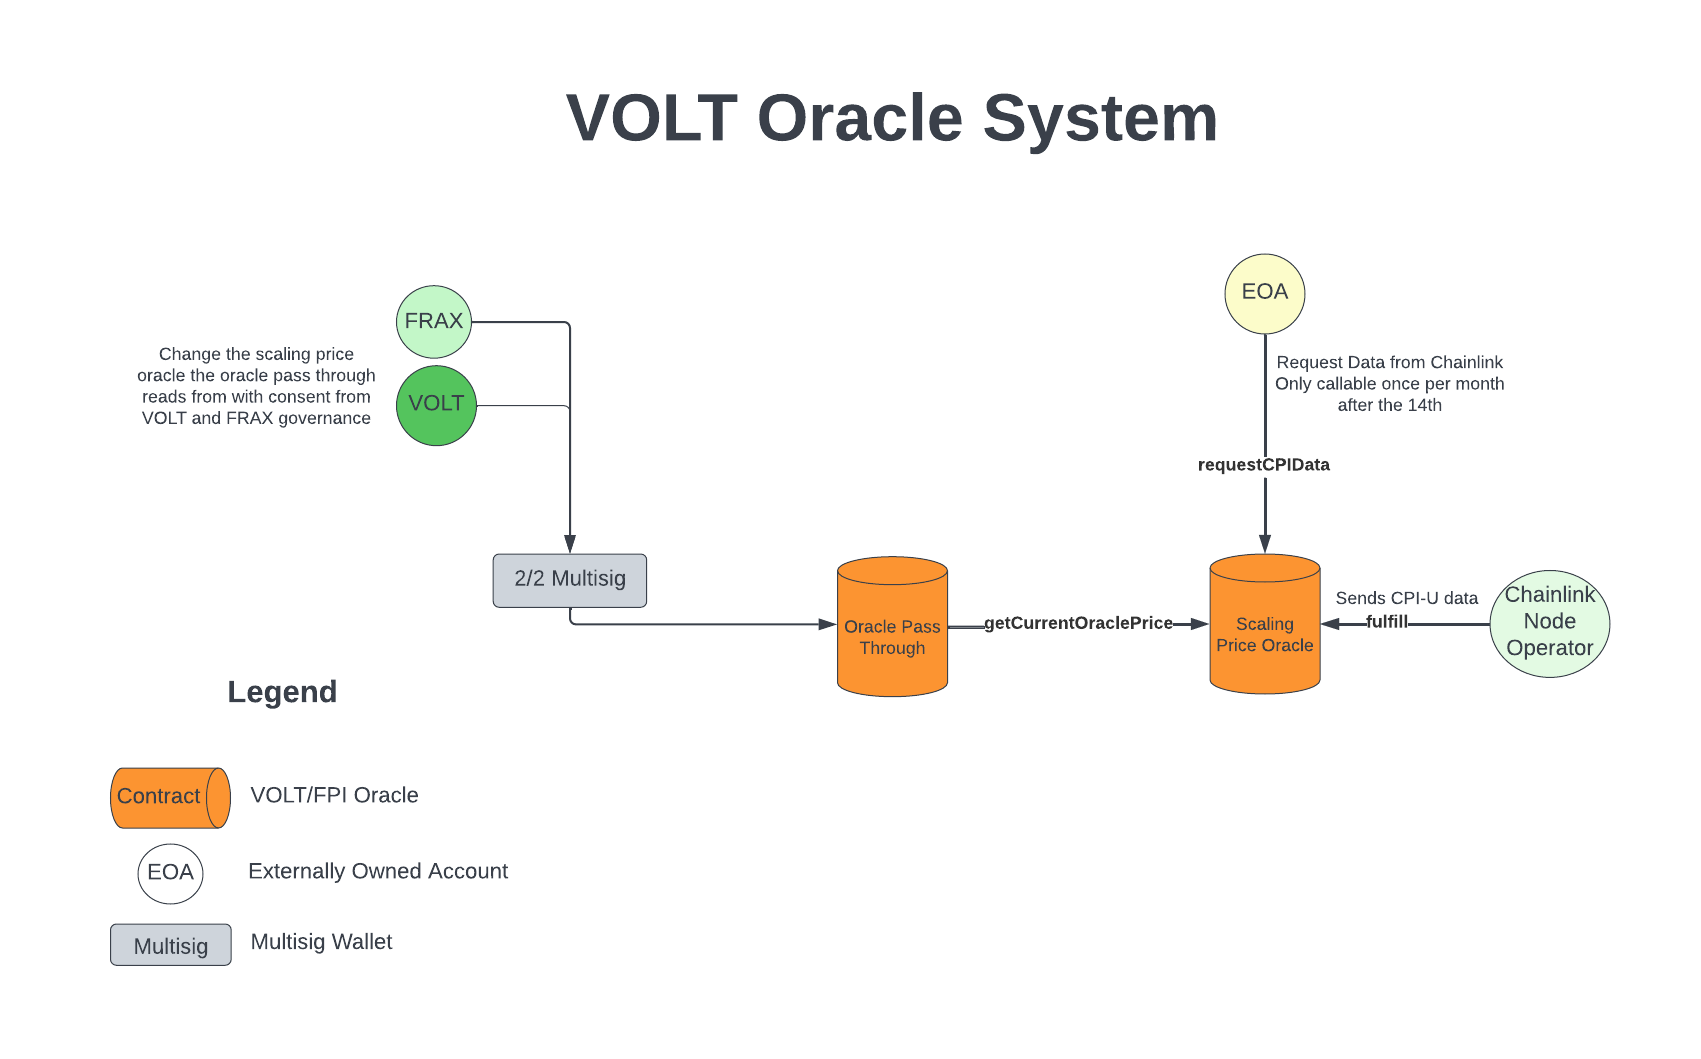 Oracle operating model of the VOLT system